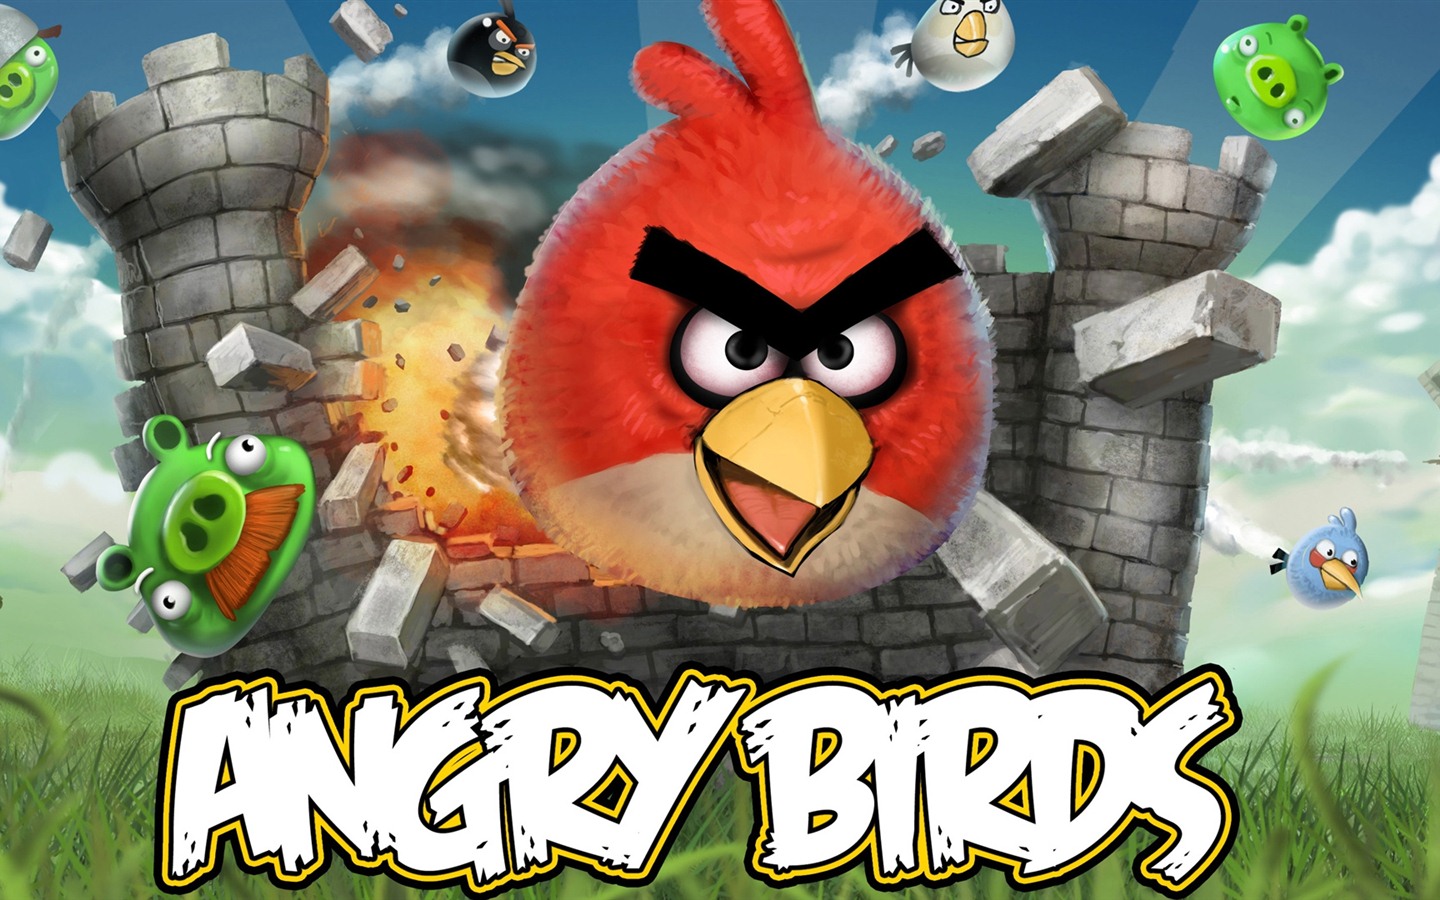 Angry Birds Spiel wallpapers #15 - 1440x900